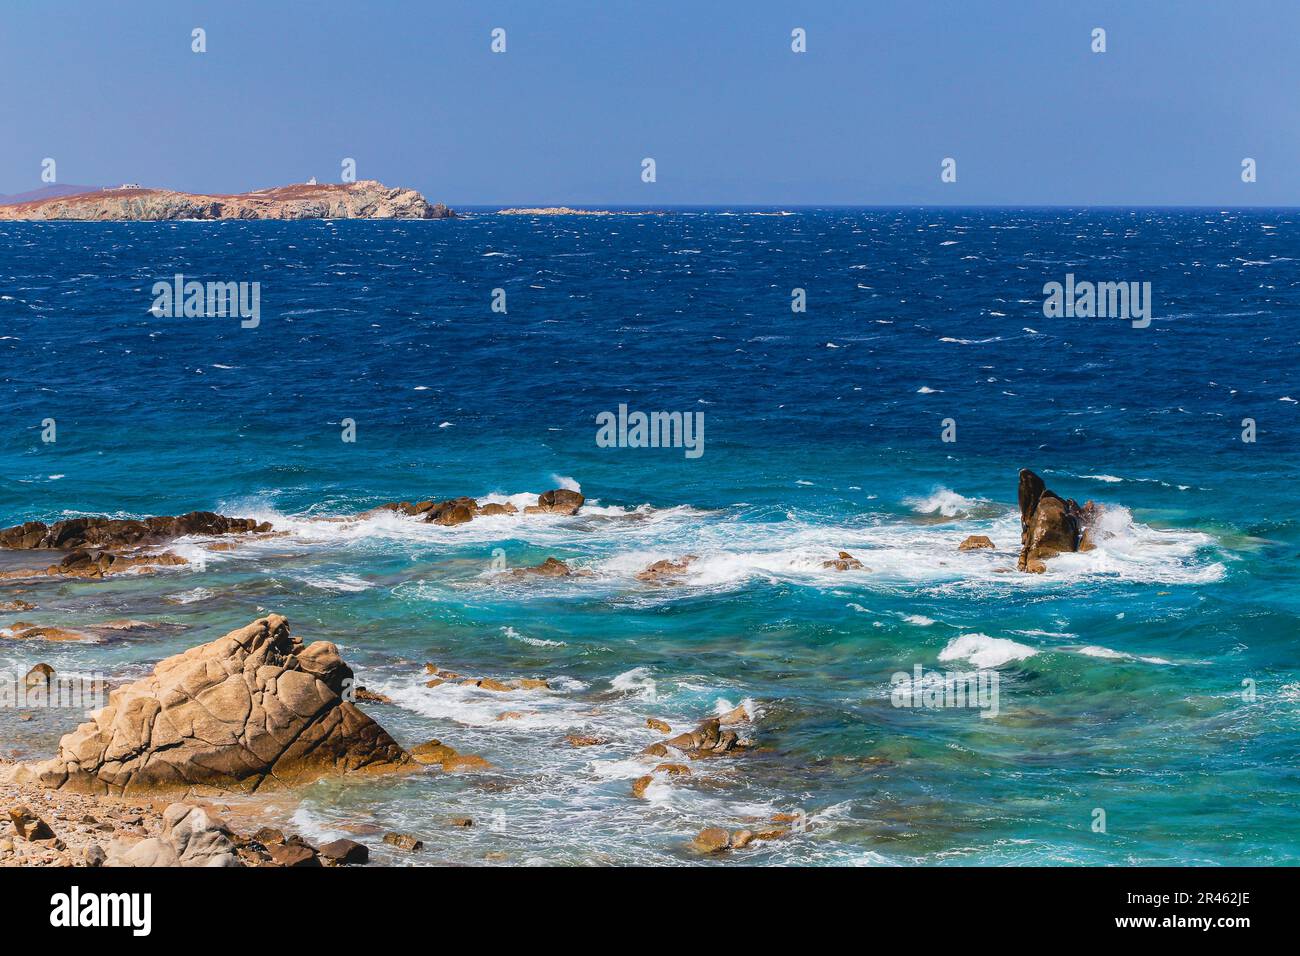 The blue sky over the sea with waves crashing on the rocks in Mykonos, Greece Stock Photo